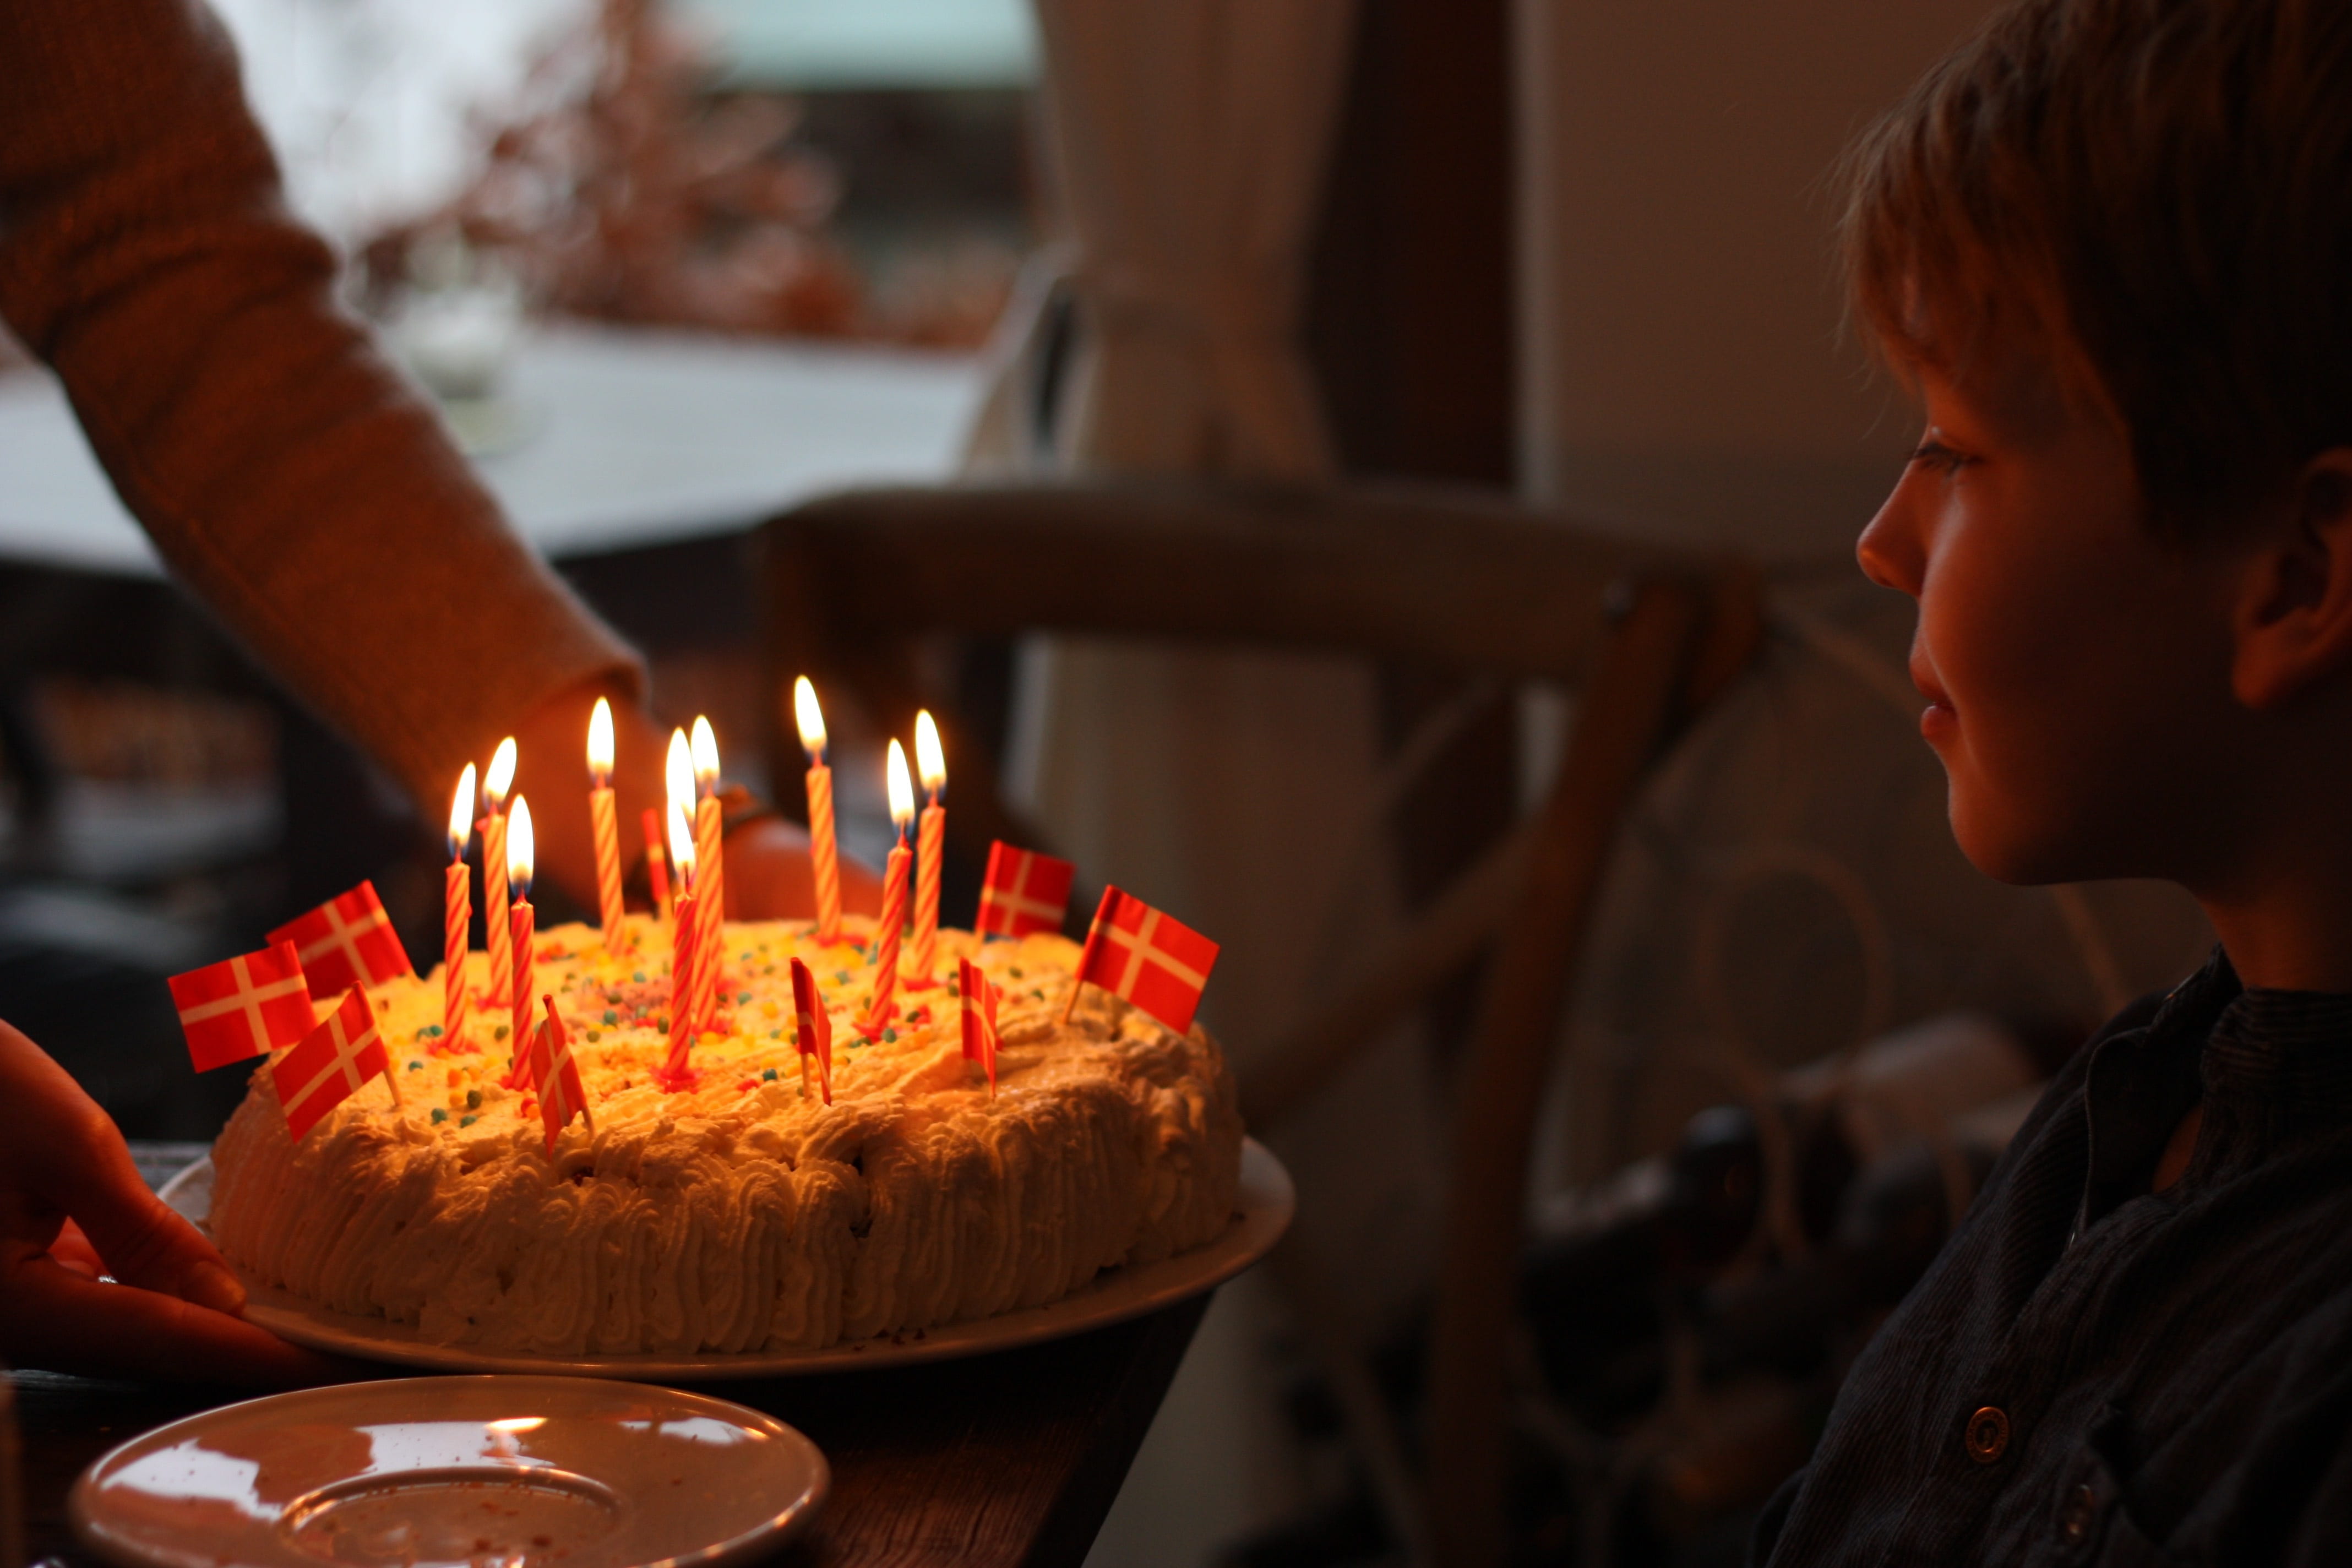 birthday, cake, boy, candle, celebration, fire, food and drink